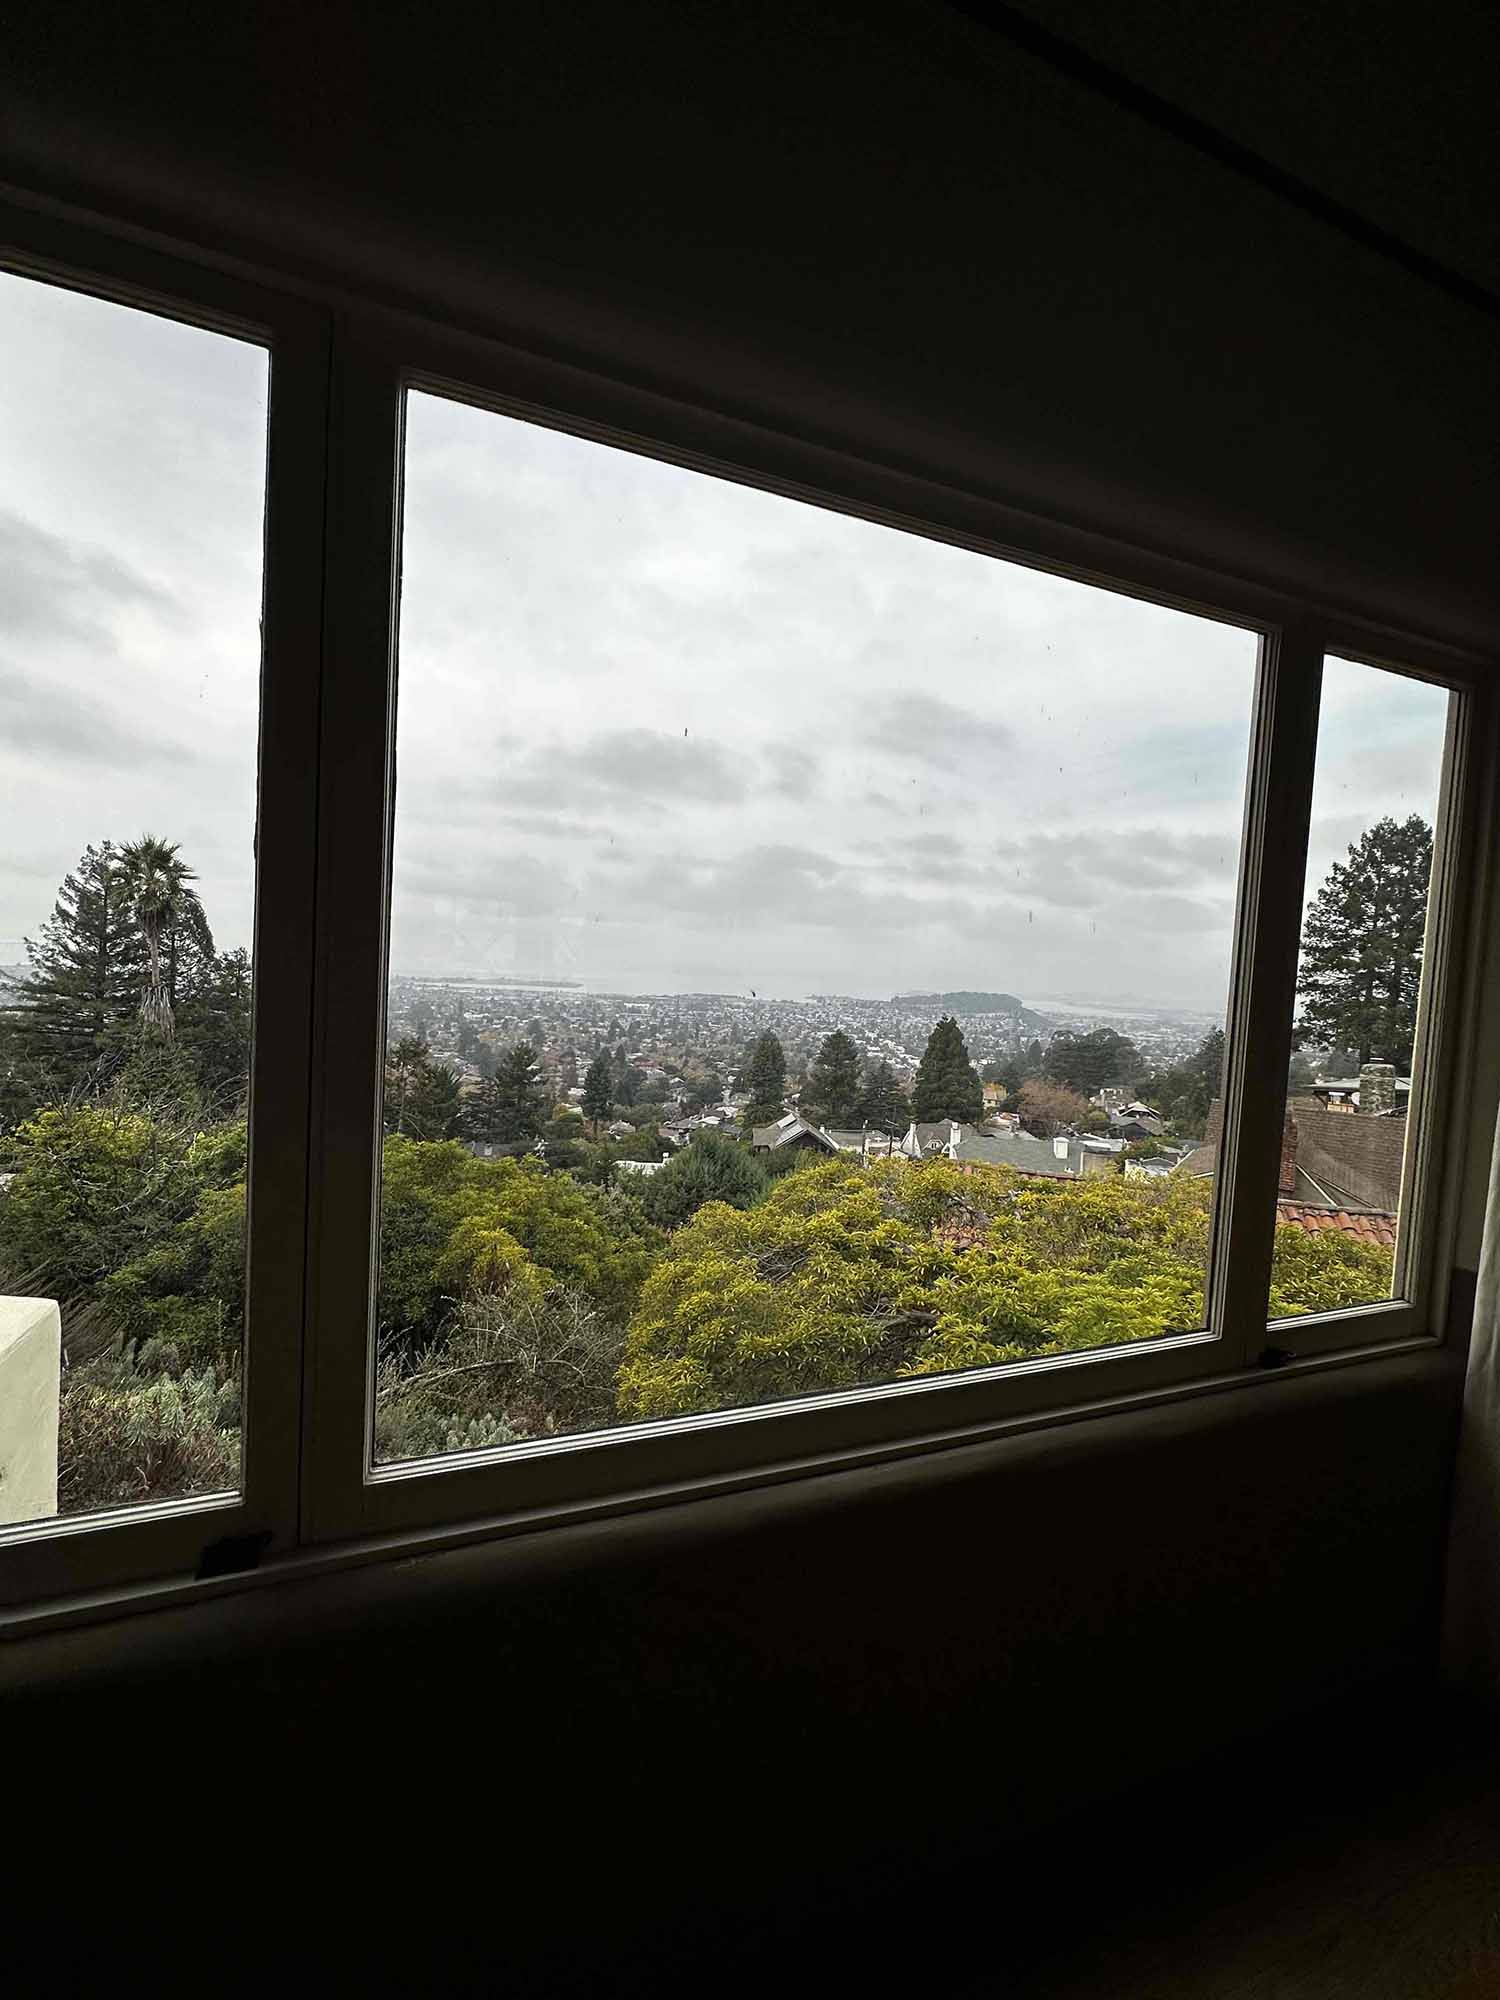 ClimatePro and 3M Prestige 70 Window Film makes this Berkeley, CA home better. 